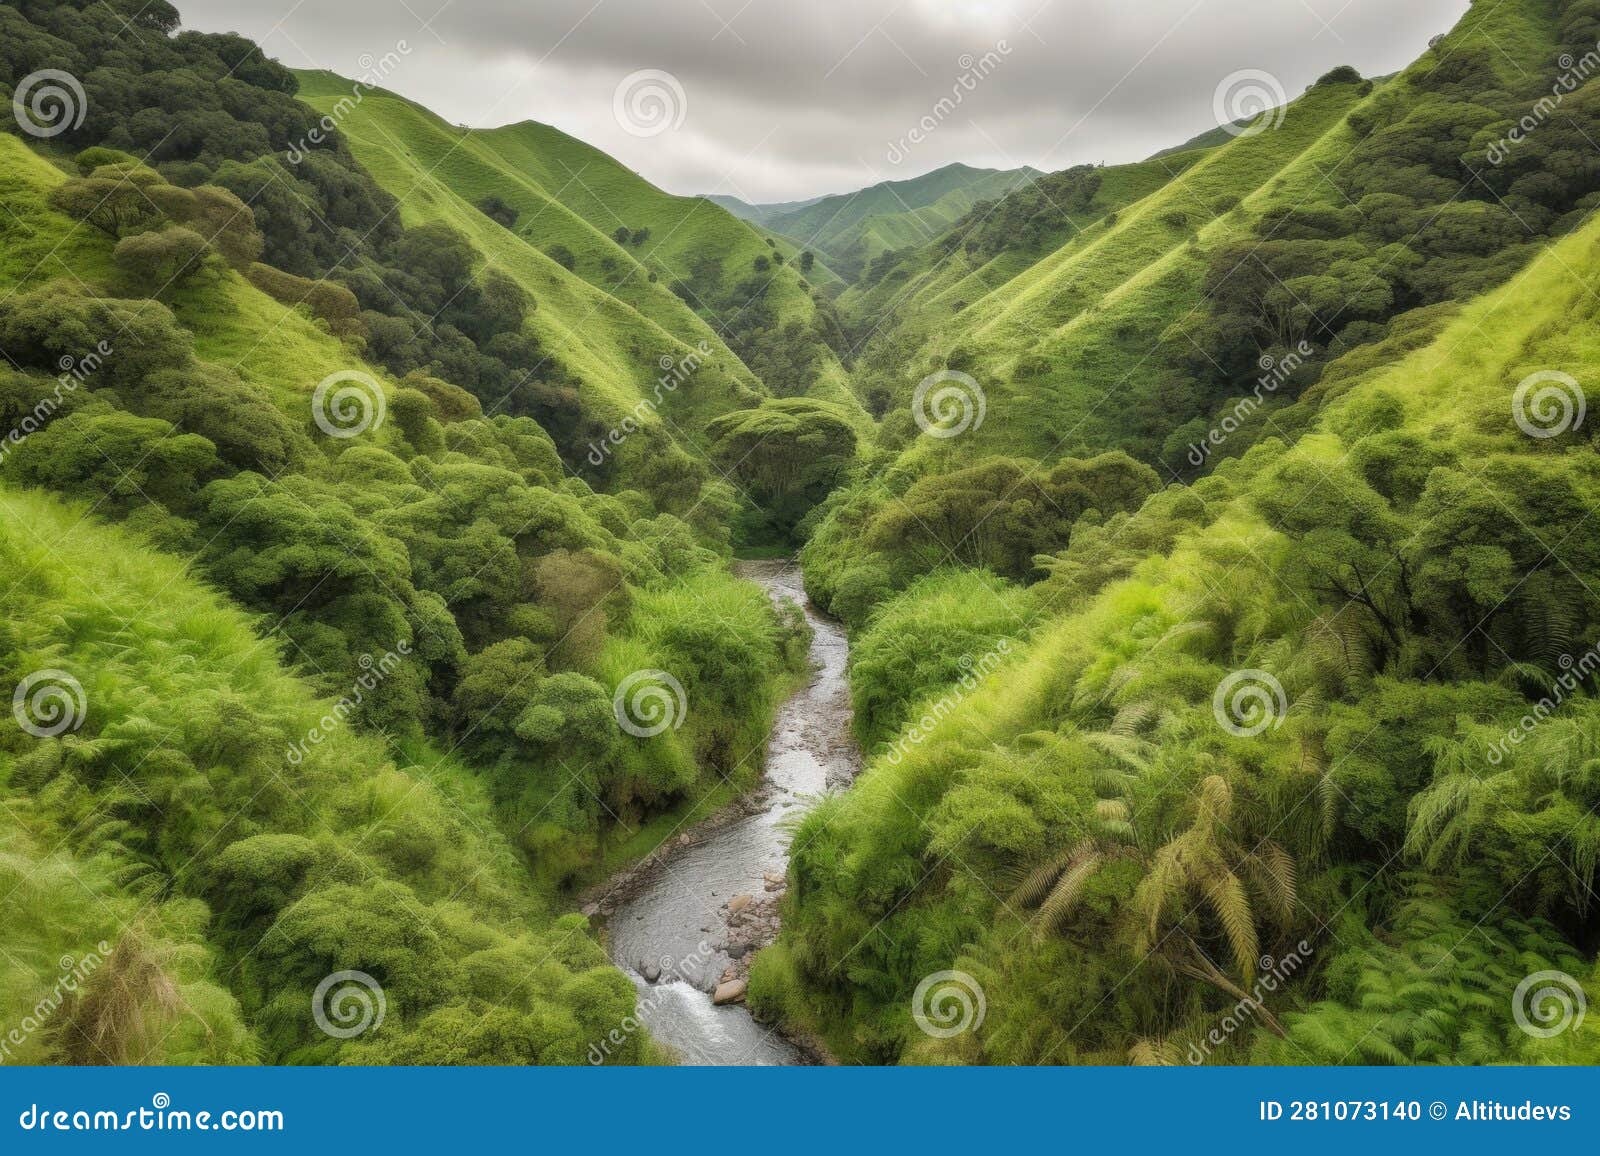 Rolling Hills with Rolling Stream, Surrounded by Lush Greenery Stock ...